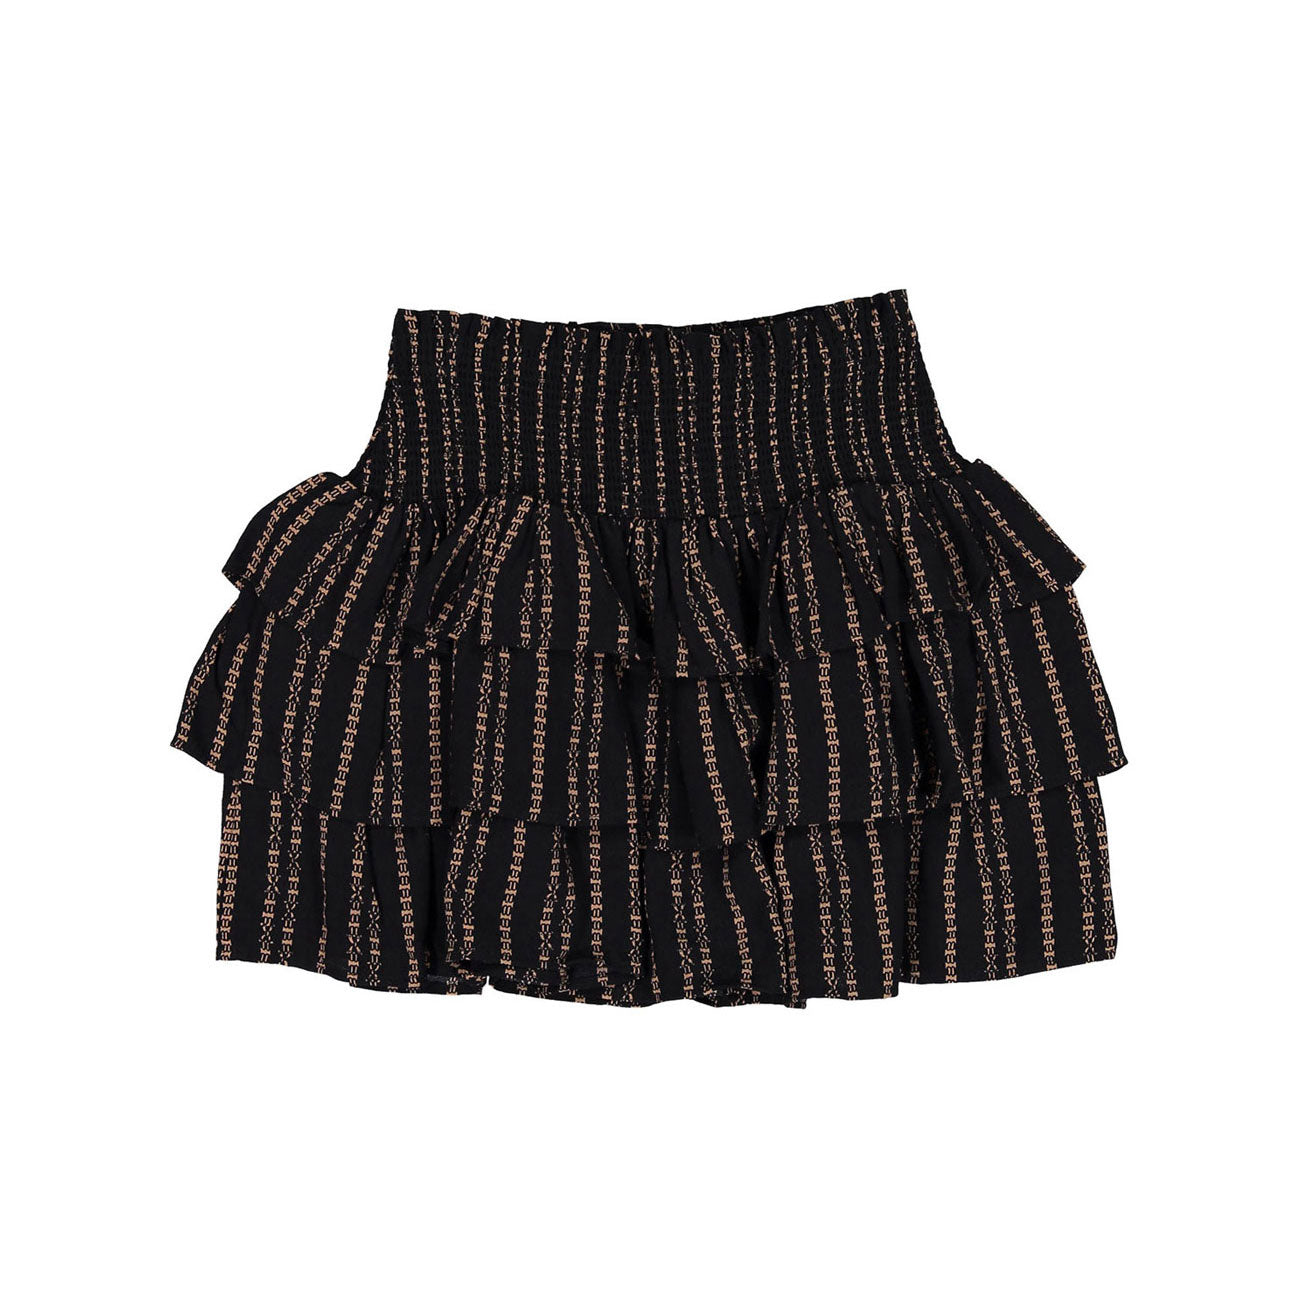 Recycled shaping skirt from the collaboration with raye black Dorina